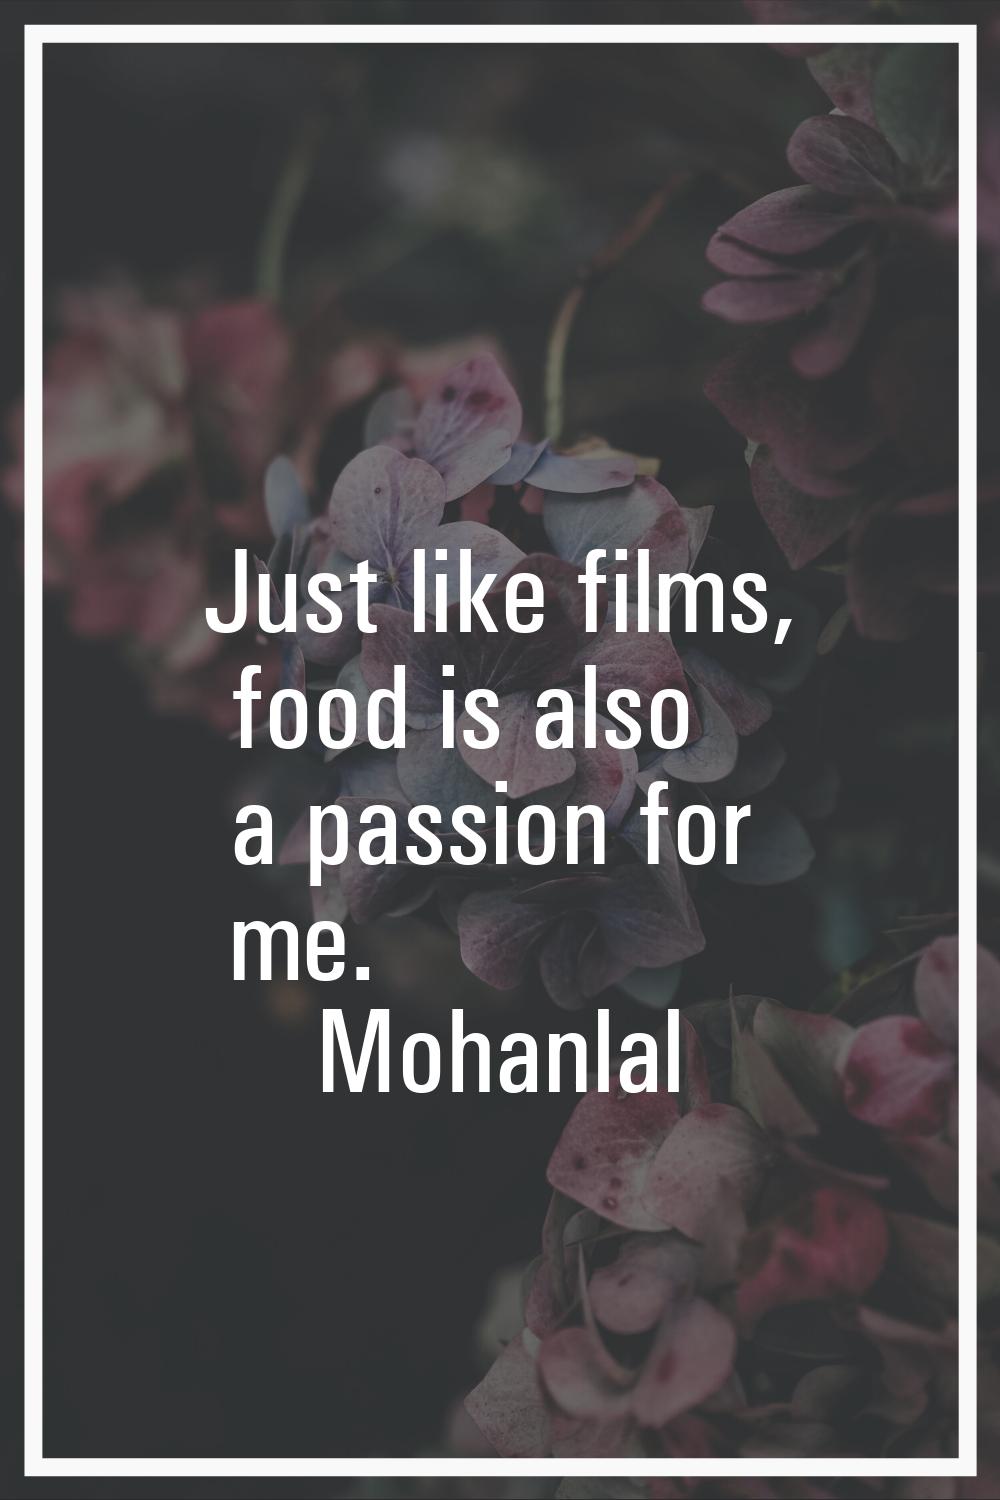 Just like films, food is also a passion for me.